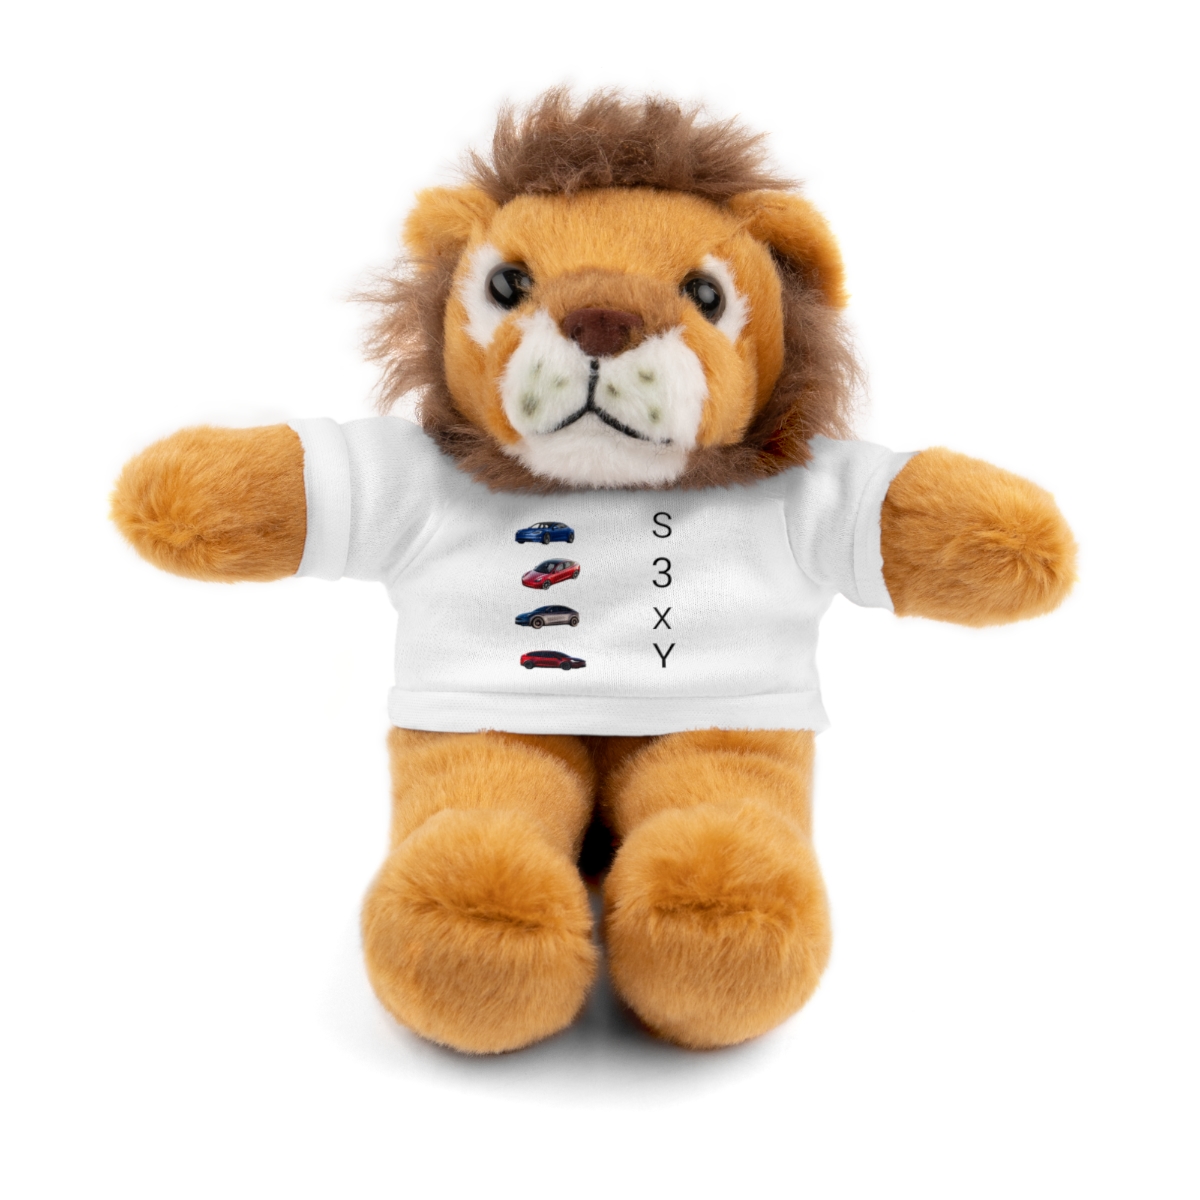 The S.3.X.Y Stuffed Animals with Tee product thumbnail image